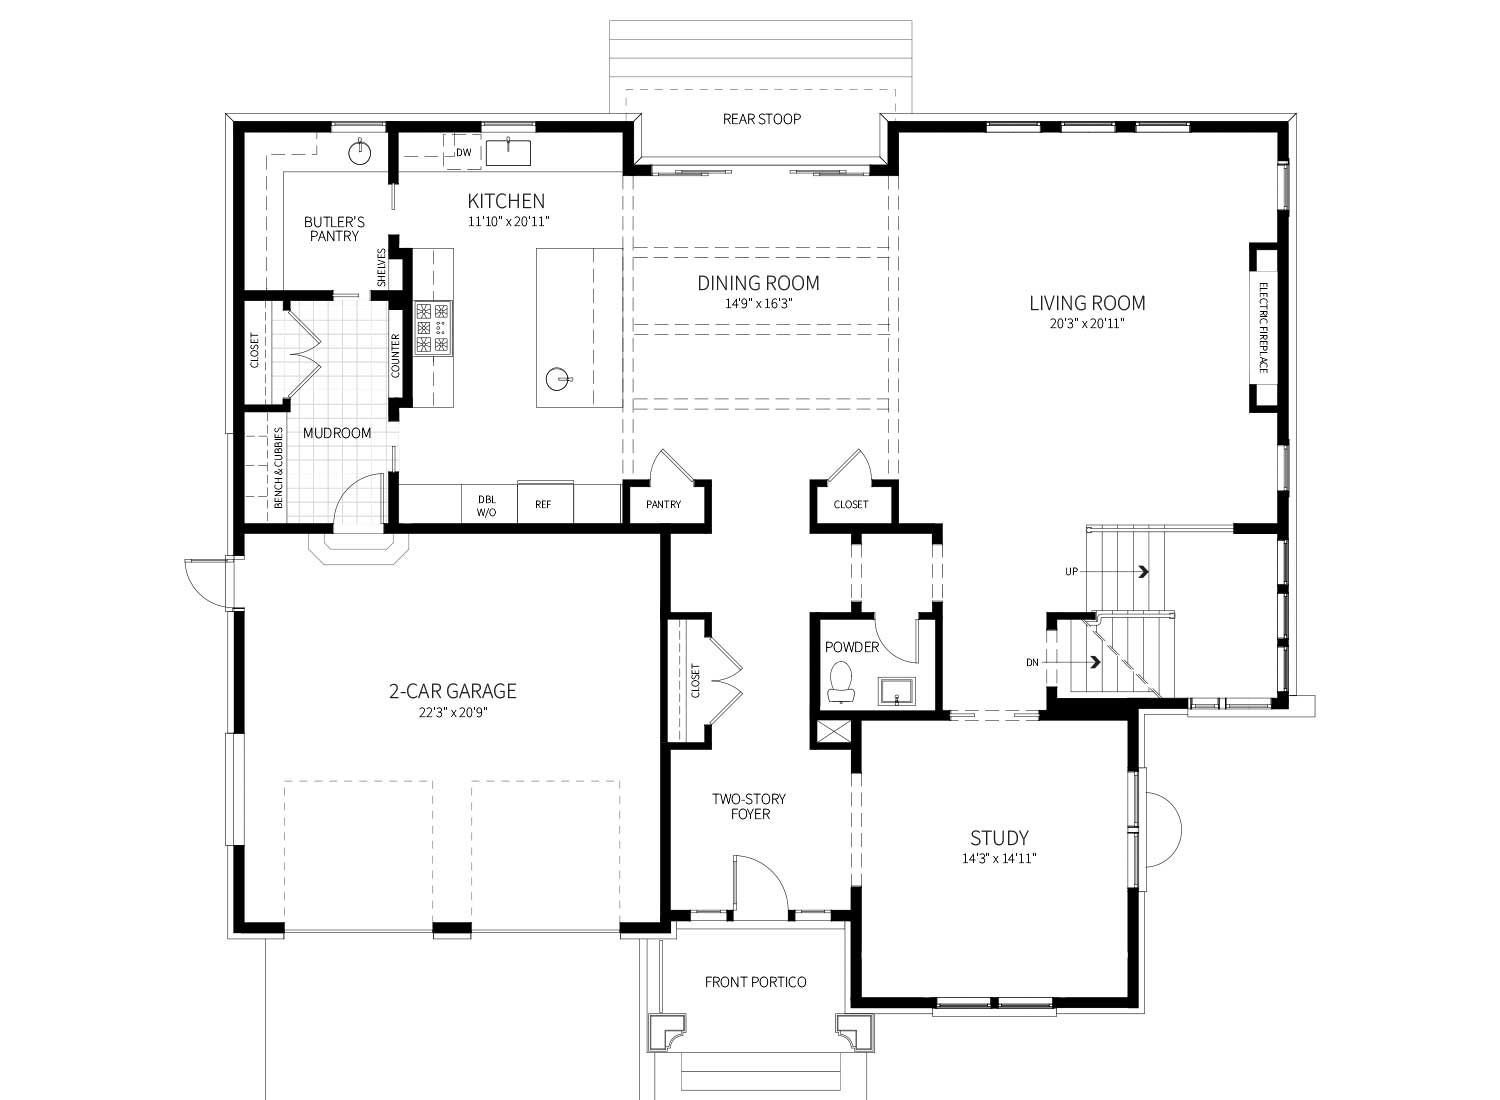 First floor plan of the Geranium model, showing two story foyer, dining room centered between Kitchen and Living Room, accordion doors to rear stoop.